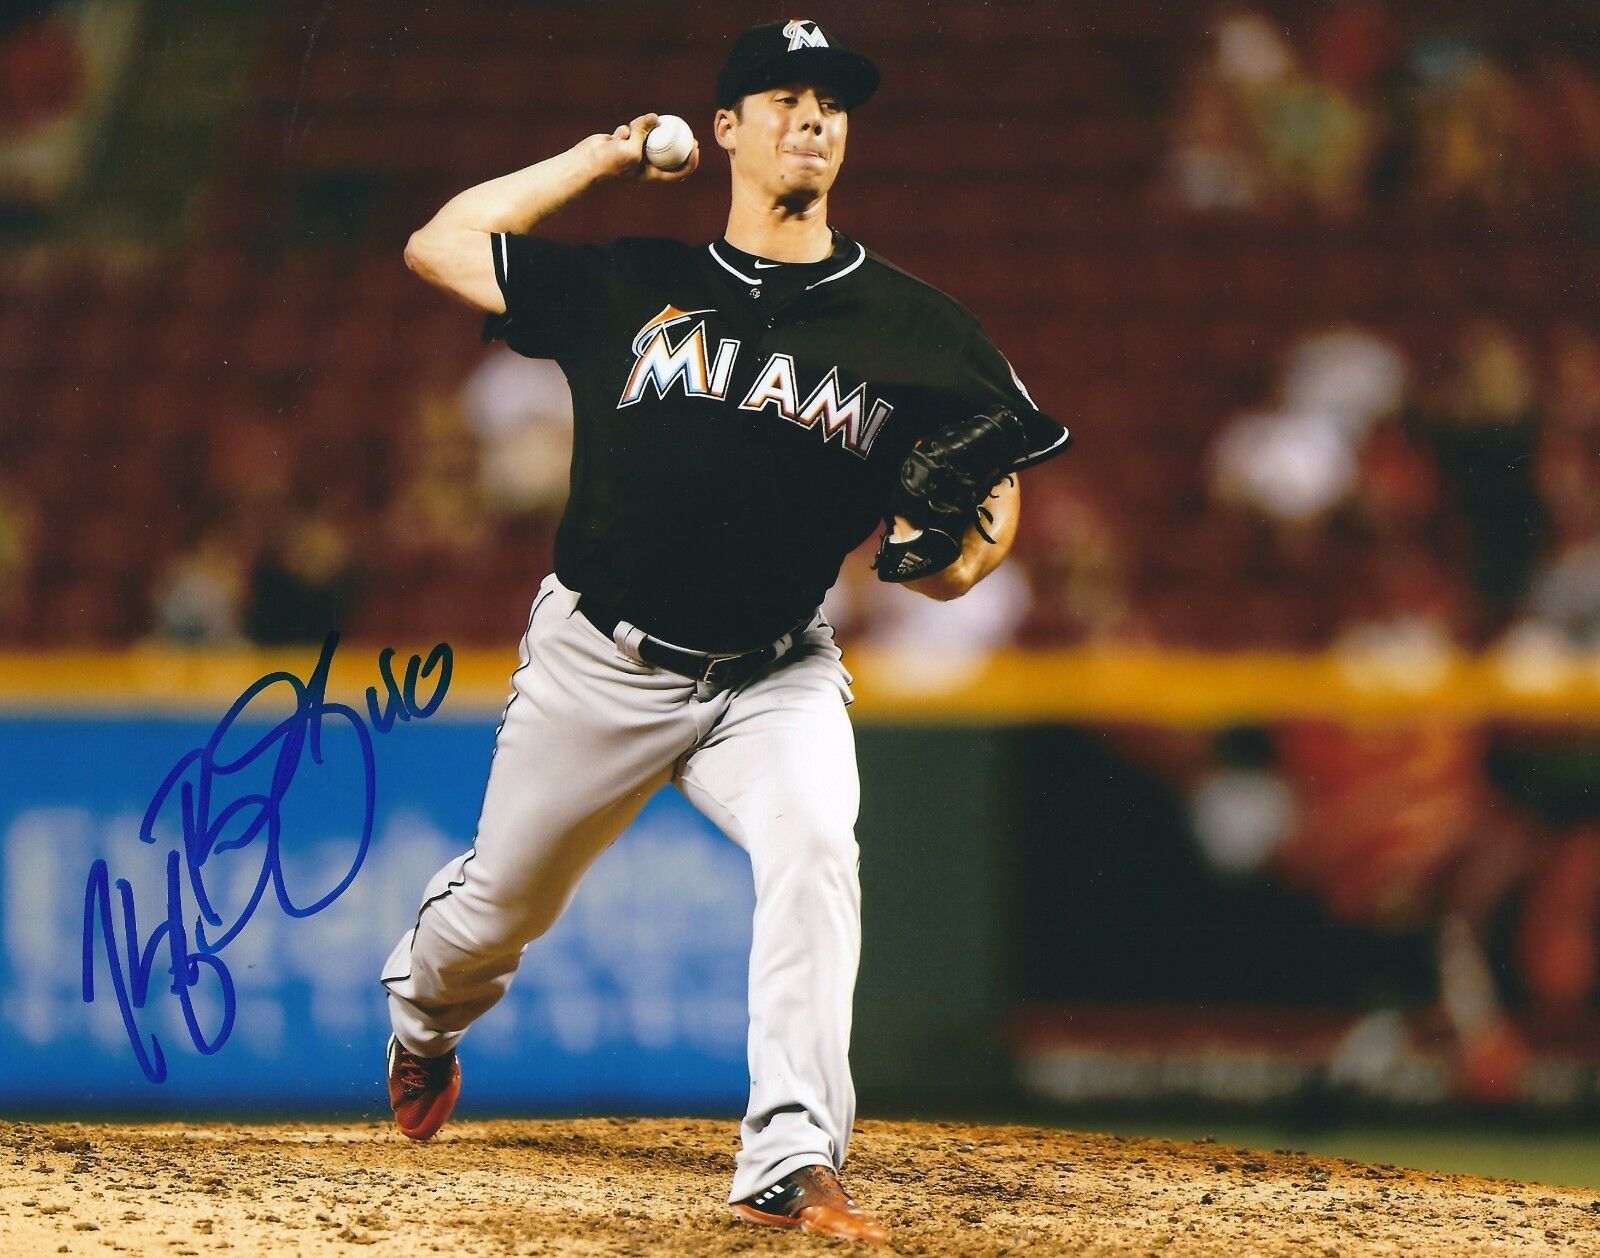 AUTOGRAPHED KYLE BARRACLOUGH Miami Marlins 8X10 Photo Poster painting - COA